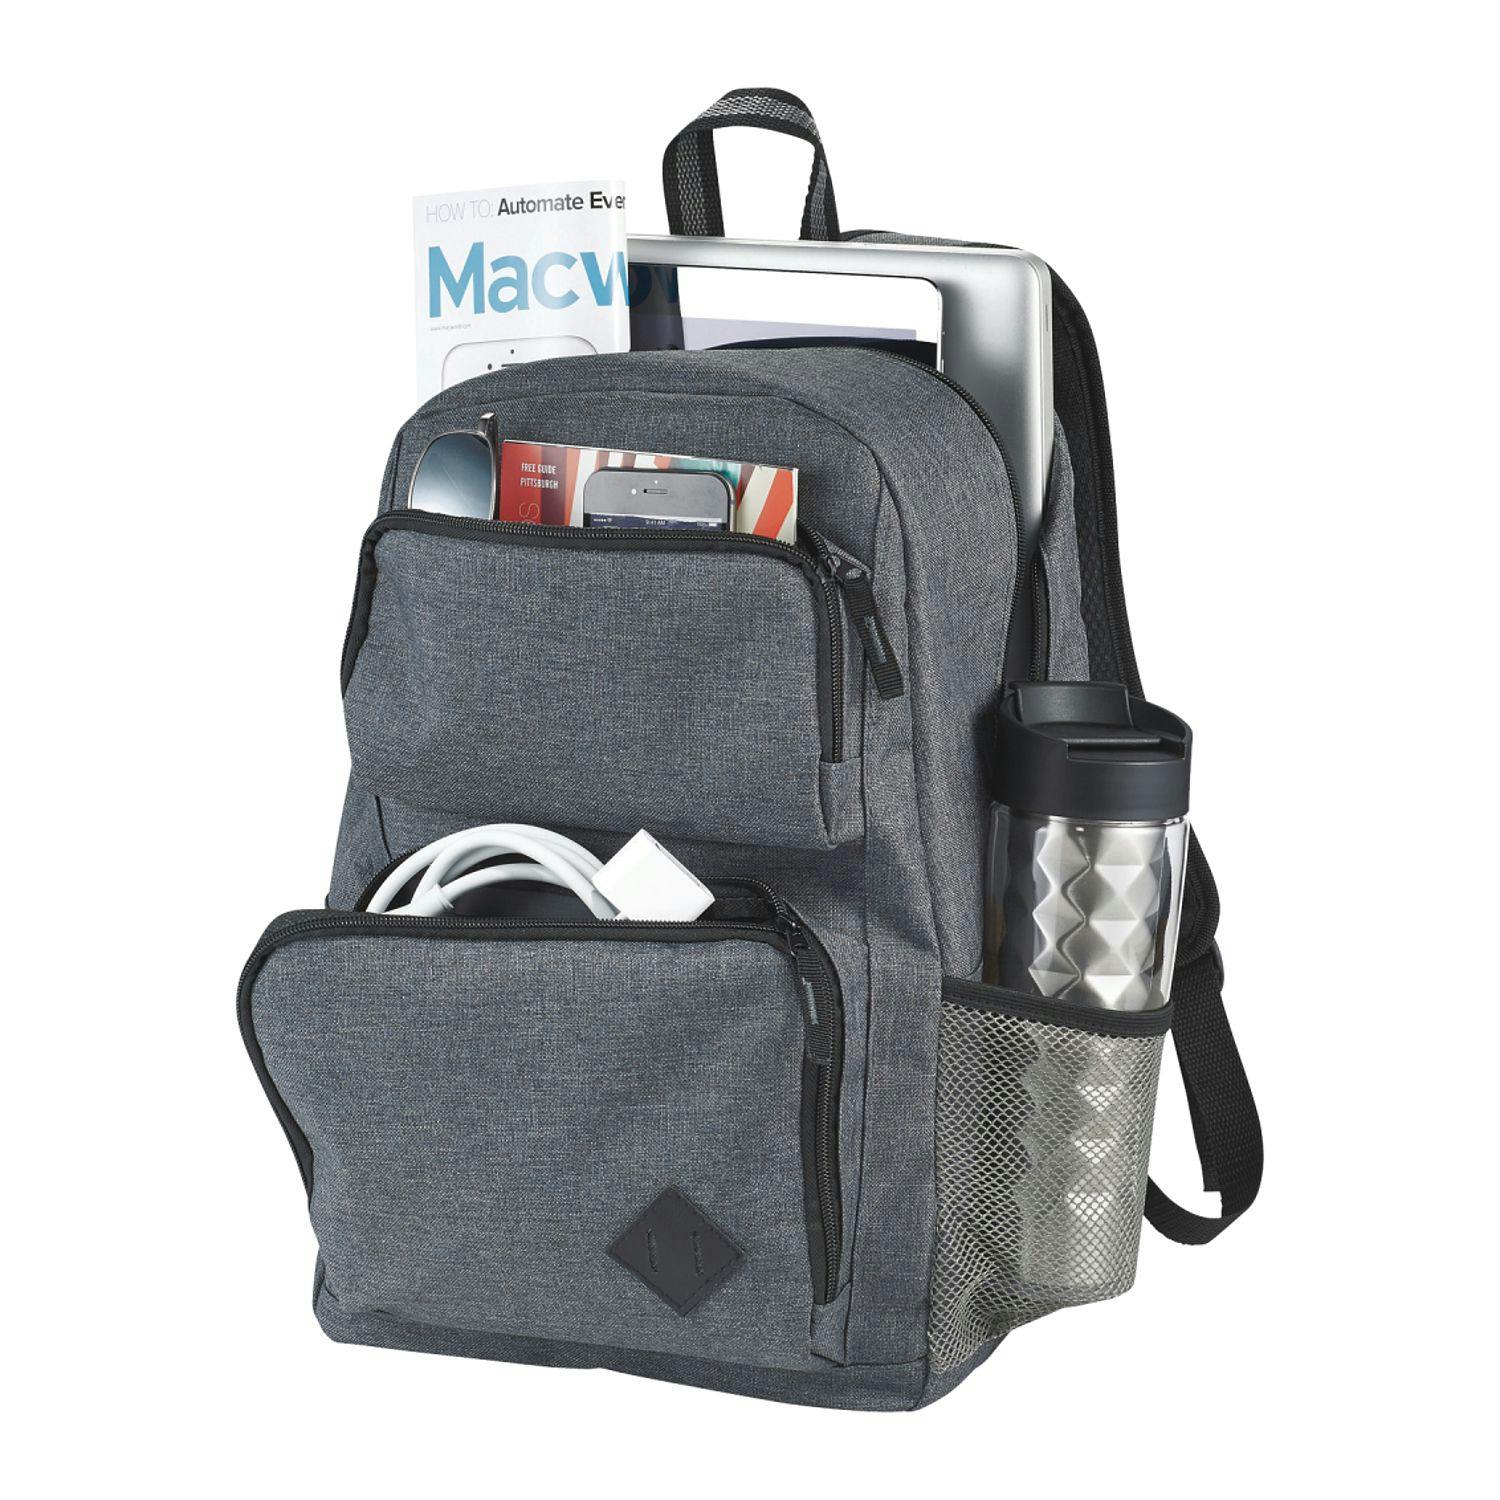 Graphite Deluxe 15" Computer Backpack - additional Image 2